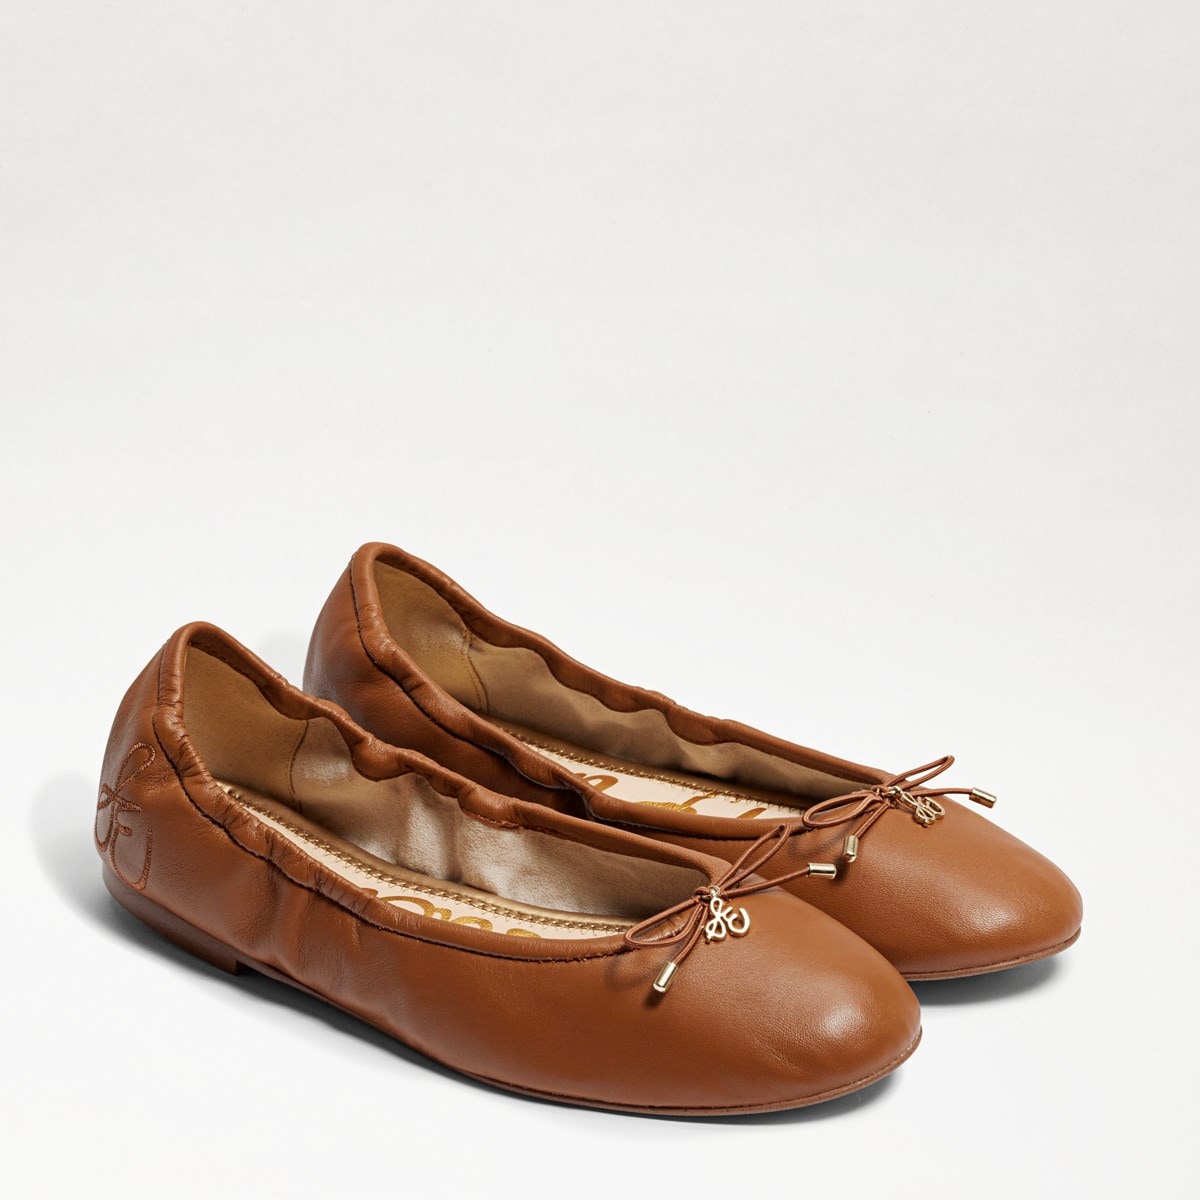 Sam Edelman Felicia Ballet Flat | Womens Flats and Loafers